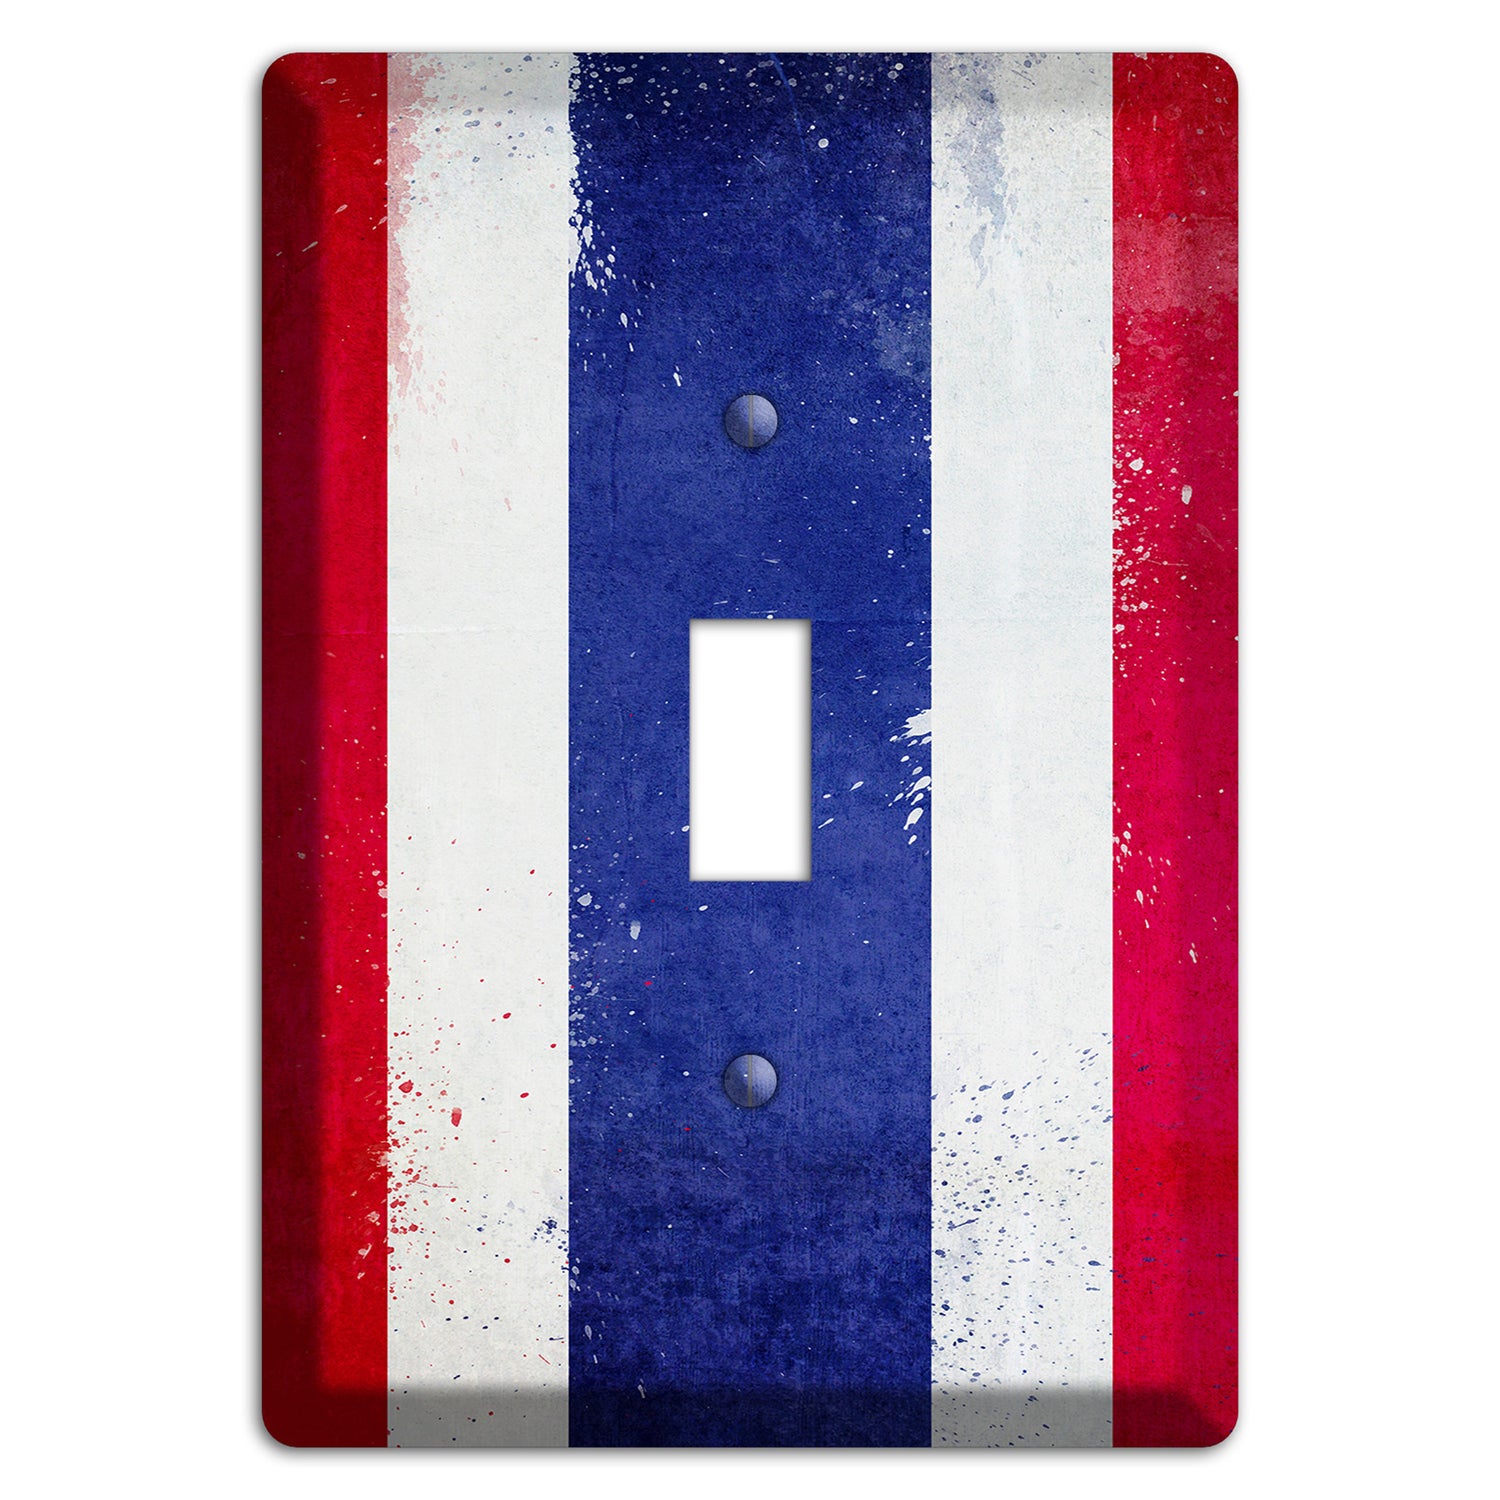 Thailand Cover Plates Cover Plates